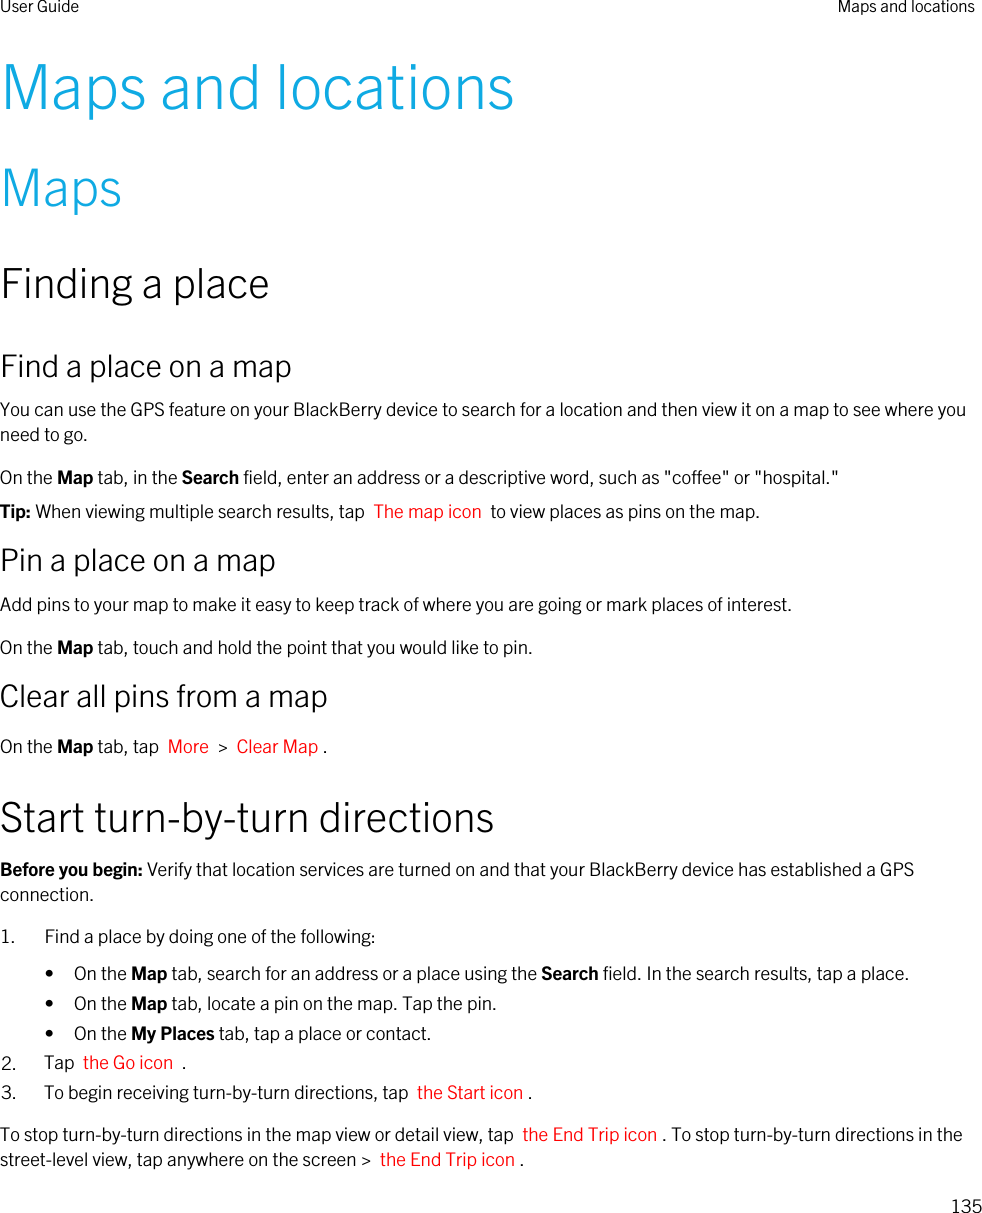 Maps and locationsMapsFinding a placeFind a place on a mapYou can use the GPS feature on your BlackBerry device to search for a location and then view it on a map to see where you need to go.On the Map tab, in the Search field, enter an address or a descriptive word, such as &quot;coffee&quot; or &quot;hospital.&quot;Tip: When viewing multiple search results, tap  The map icon  to view places as pins on the map.Pin a place on a mapAdd pins to your map to make it easy to keep track of where you are going or mark places of interest.On the Map tab, touch and hold the point that you would like to pin.Clear all pins from a mapOn the Map tab, tap  More  &gt;  Clear Map .Start turn-by-turn directionsBefore you begin: Verify that location services are turned on and that your BlackBerry device has established a GPS connection.1. Find a place by doing one of the following:• On the Map tab, search for an address or a place using the Search field. In the search results, tap a place.• On the Map tab, locate a pin on the map. Tap the pin.• On the My Places tab, tap a place or contact.2. Tap  the Go icon  .3. To begin receiving turn-by-turn directions, tap  the Start icon .To stop turn-by-turn directions in the map view or detail view, tap  the End Trip icon . To stop turn-by-turn directions in the street-level view, tap anywhere on the screen &gt;  the End Trip icon .User Guide Maps and locations135